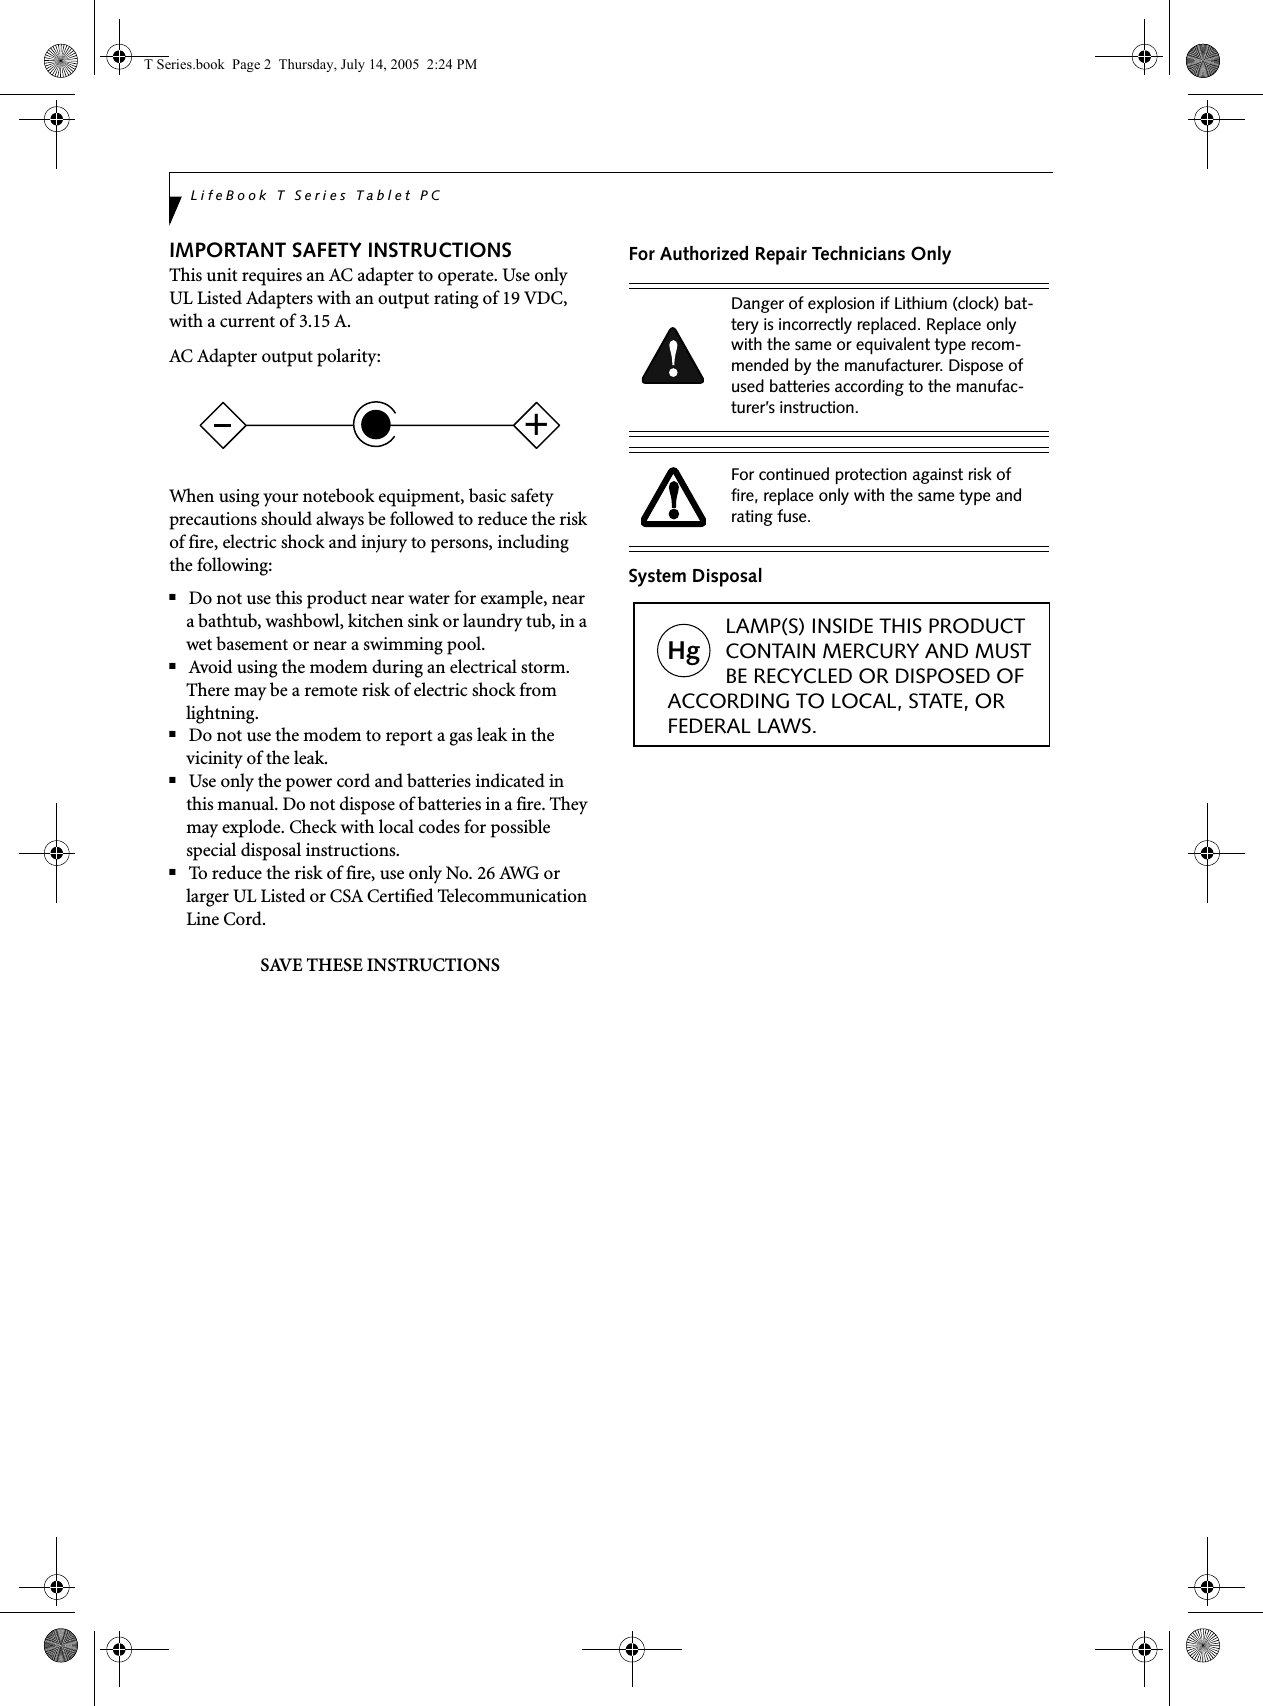 LifeBook T Series Tablet PCIMPORTANT SAFETY INSTRUCTIONS This unit requires an AC adapter to operate. Use only UL Listed Adapters with an output rating of 19 VDC, with a current of 3.15 A.AC Adapter output polarity:When using your notebook equipment, basic safety precautions should always be followed to reduce the risk of fire, electric shock and injury to persons, including the following:■Do not use this product near water for example, near a bathtub, washbowl, kitchen sink or laundry tub, in a wet basement or near a swimming pool.■Avoid using the modem during an electrical storm. There may be a remote risk of electric shock from lightning.■Do not use the modem to report a gas leak in the vicinity of the leak.■Use only the power cord and batteries indicated in this manual. Do not dispose of batteries in a fire. They may explode. Check with local codes for possible special disposal instructions.■To reduce the risk of fire, use only No. 26 AWG or larger UL Listed or CSA Certified Telecommunication Line Cord.SAVE THESE INSTRUCTIONSFor Authorized Repair Technicians OnlySystem Disposal+Danger of explosion if Lithium (clock) bat-tery is incorrectly replaced. Replace only with the same or equivalent type recom-mended by the manufacturer. Dispose of used batteries according to the manufac-turer’s instruction.For continued protection against risk of fire, replace only with the same type and rating fuse.Hg          LAMP(S) INSIDE THIS PRODUCT            CONTAIN MERCURY AND MUST          BE RECYCLED OR DISPOSED OF ACCORDING TO LOCAL, STATE, ORFEDERAL LAWS.T Series.book  Page 2  Thursday, July 14, 2005  2:24 PM